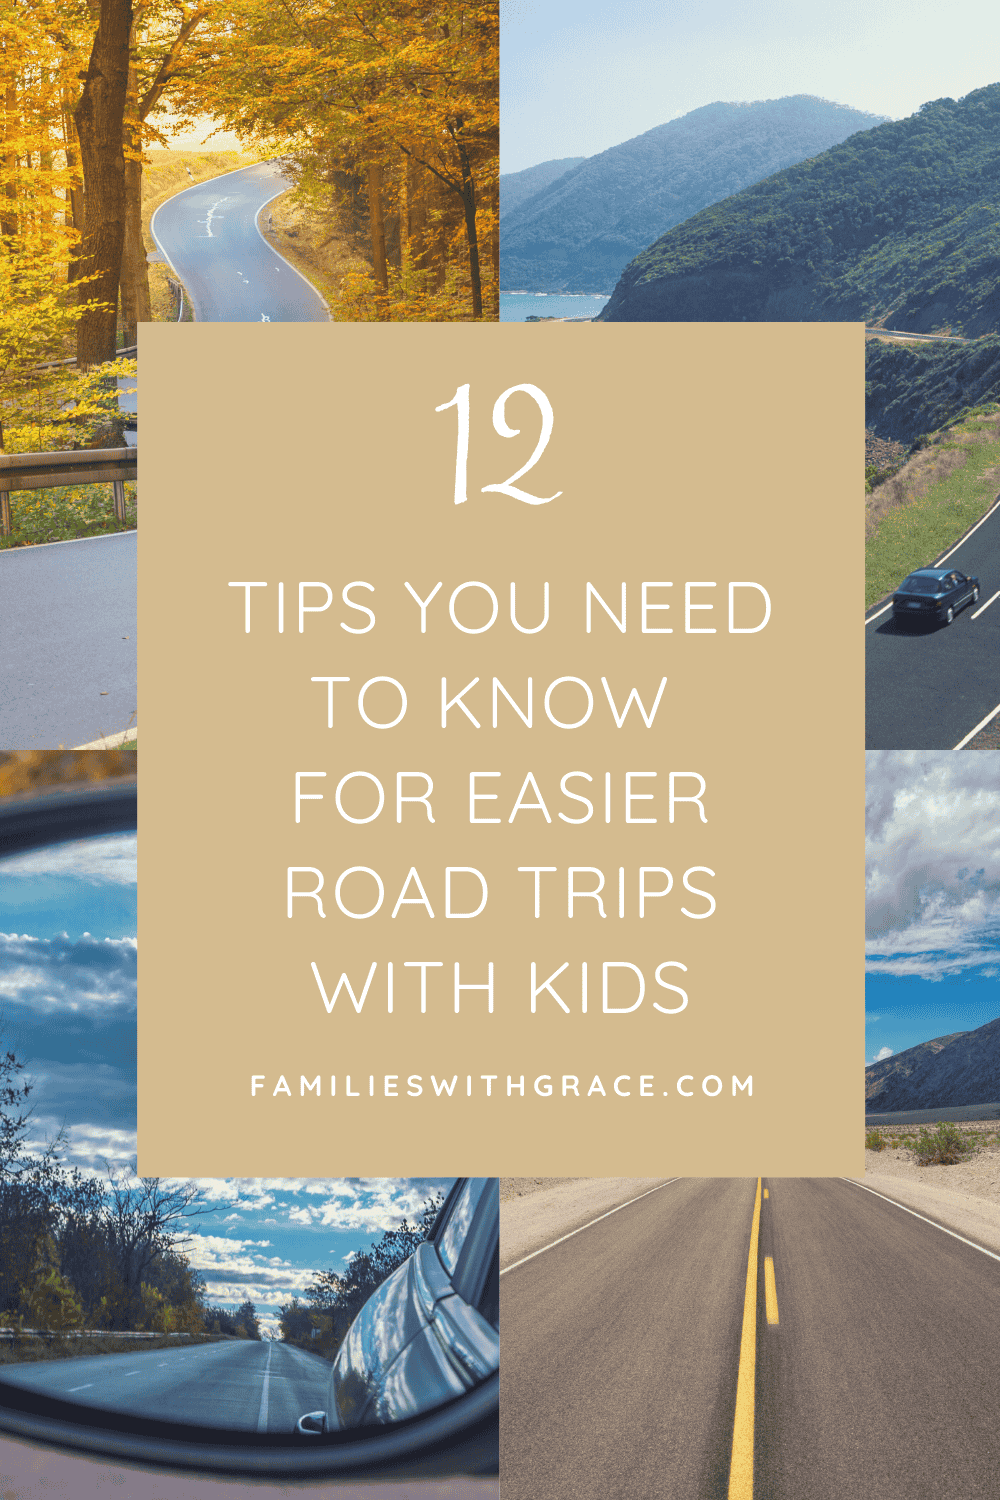 Tips you need for road trips with kids